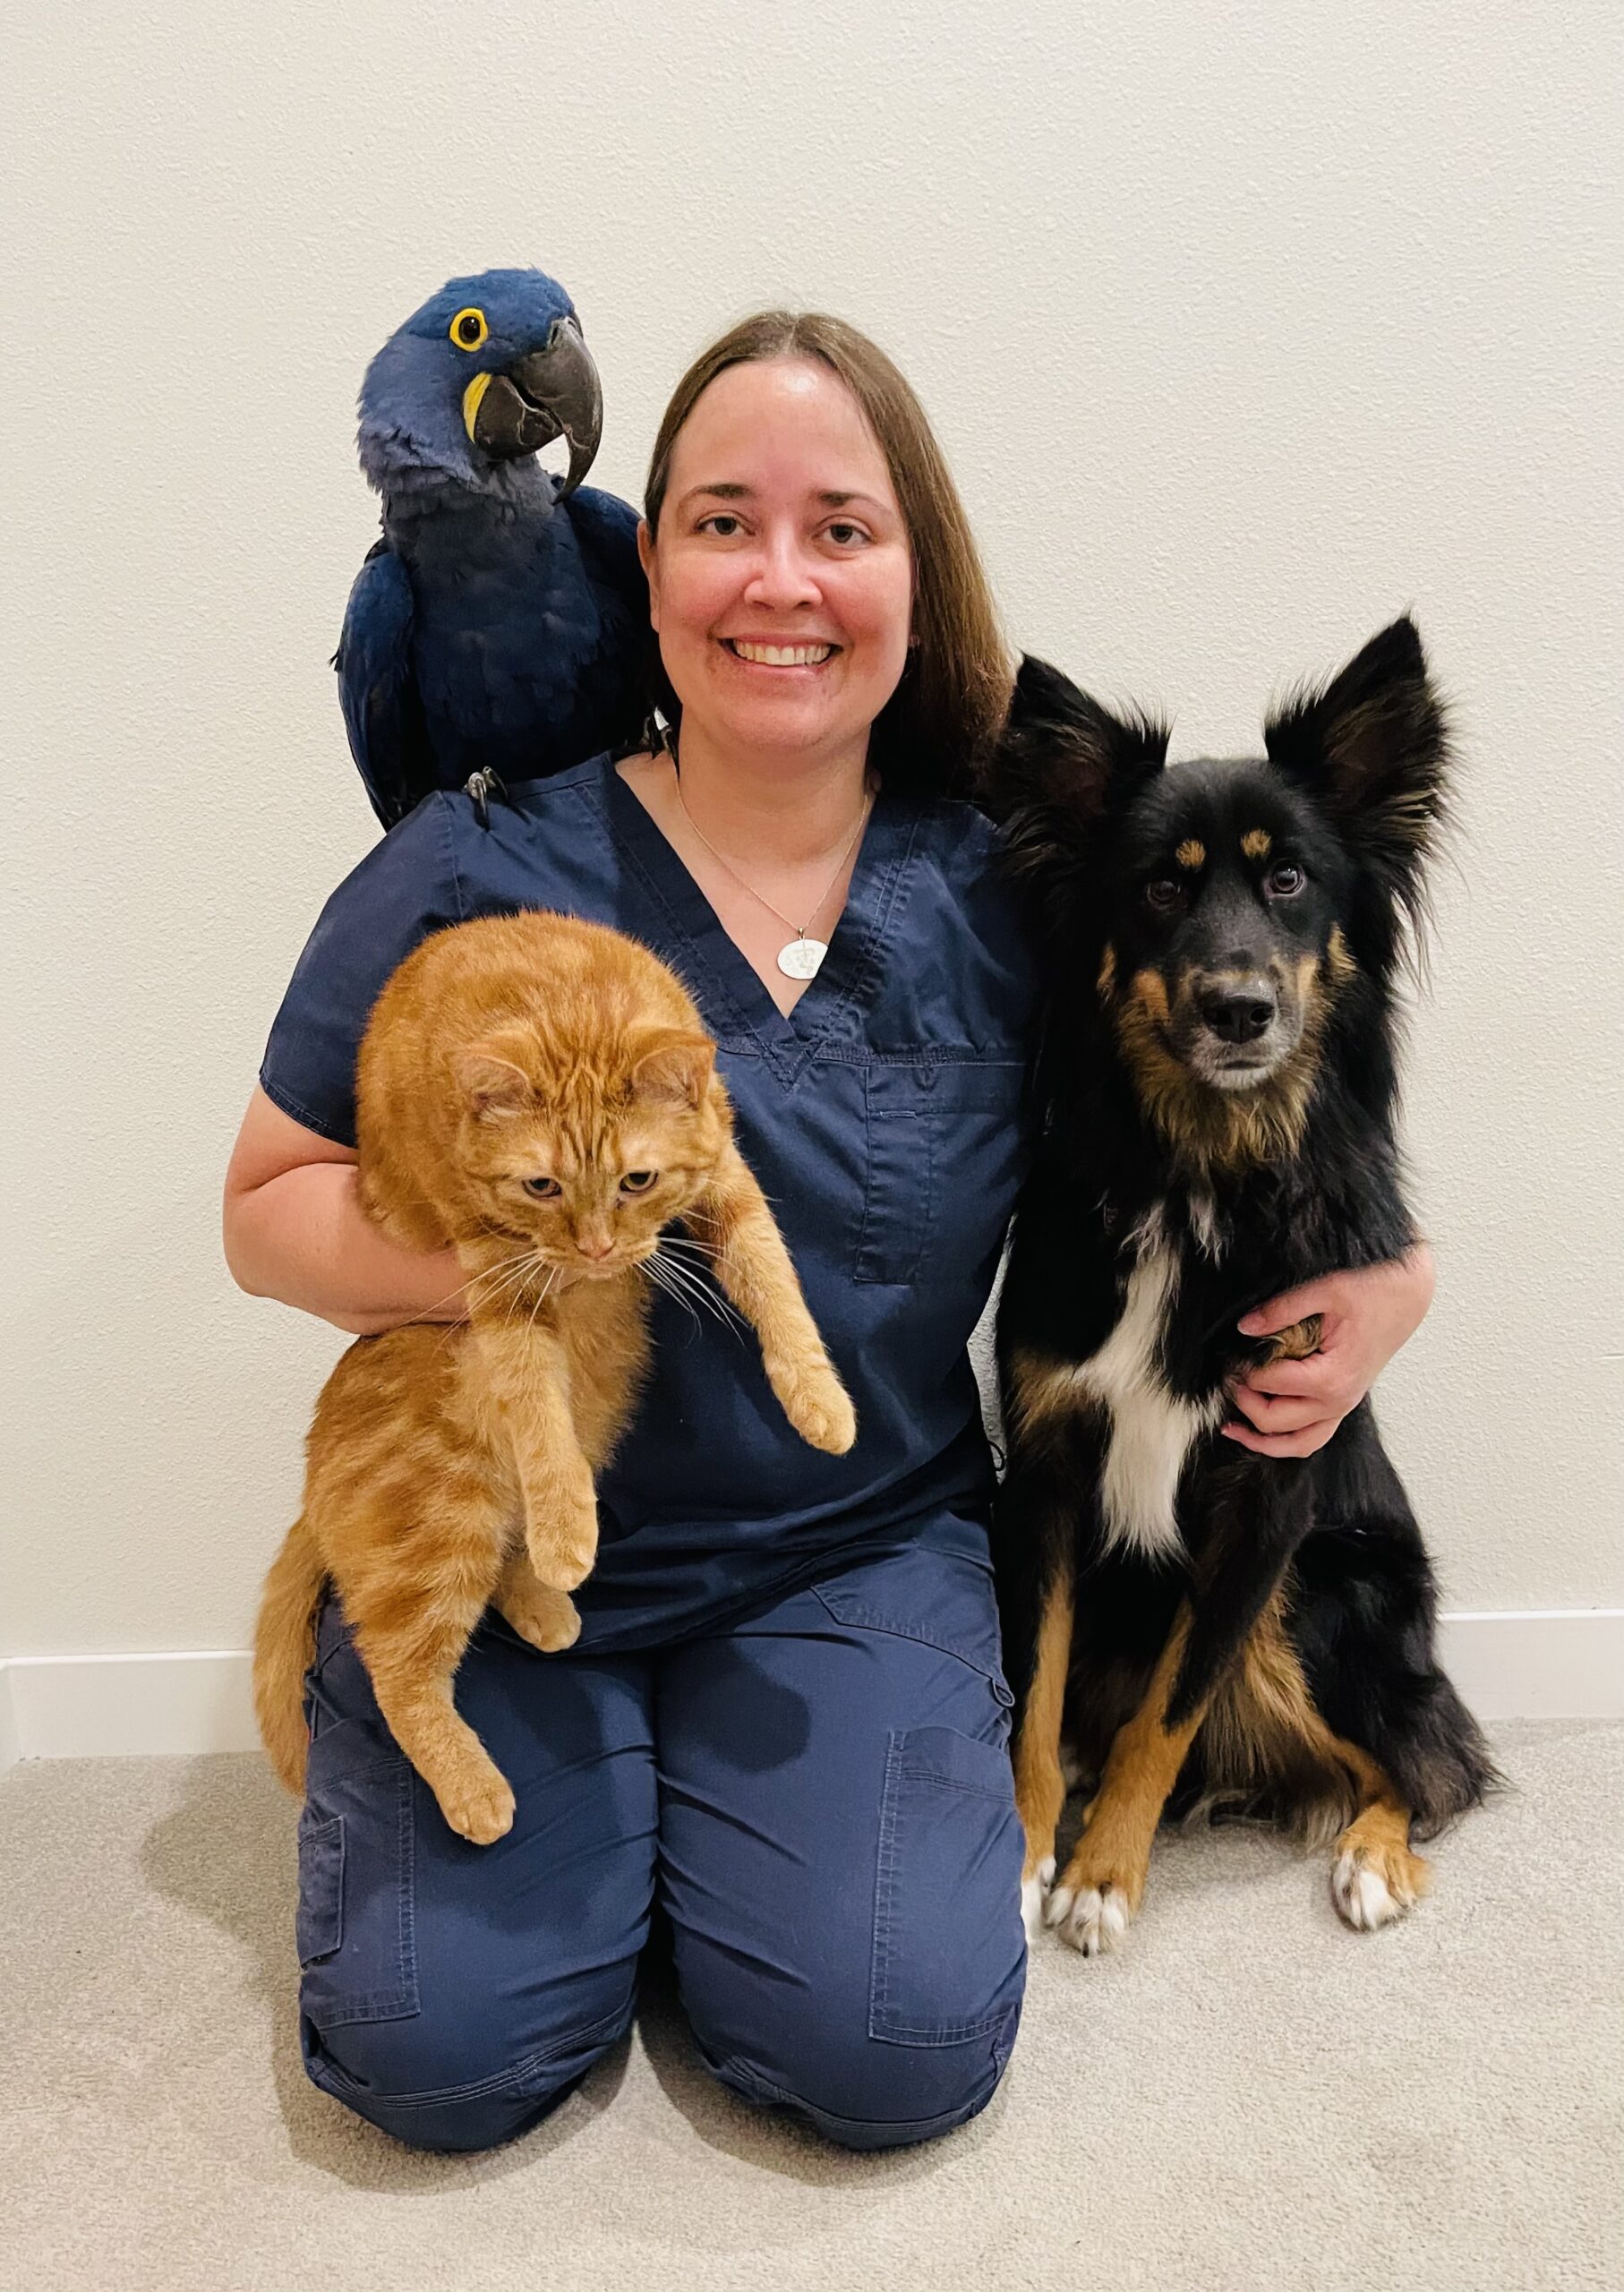 Dr. Jones with her bird, cat, and dog